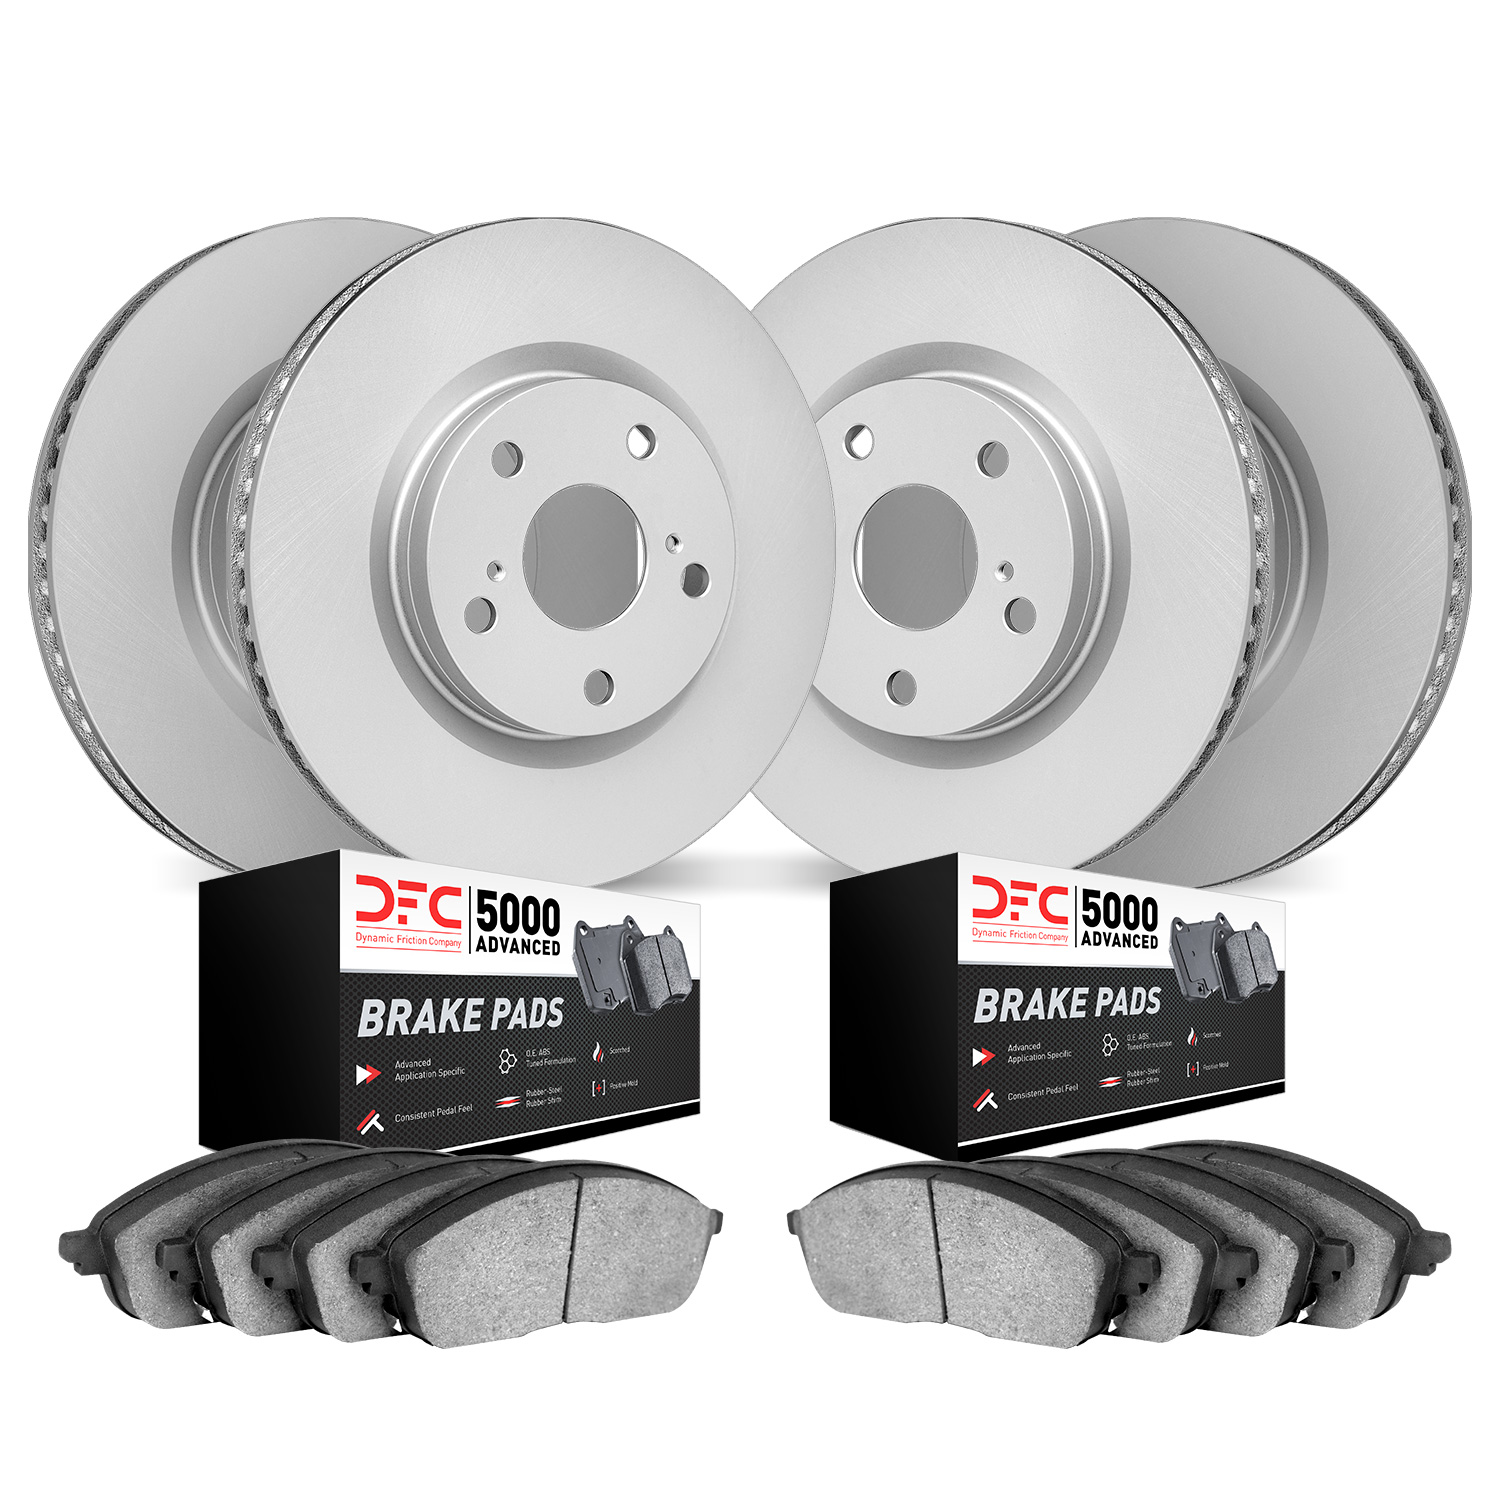 4504-63077 Geospec Brake Rotors w/5000 Advanced Brake Pads Kit, 2010-2015 Mercedes-Benz, Position: Front and Rear